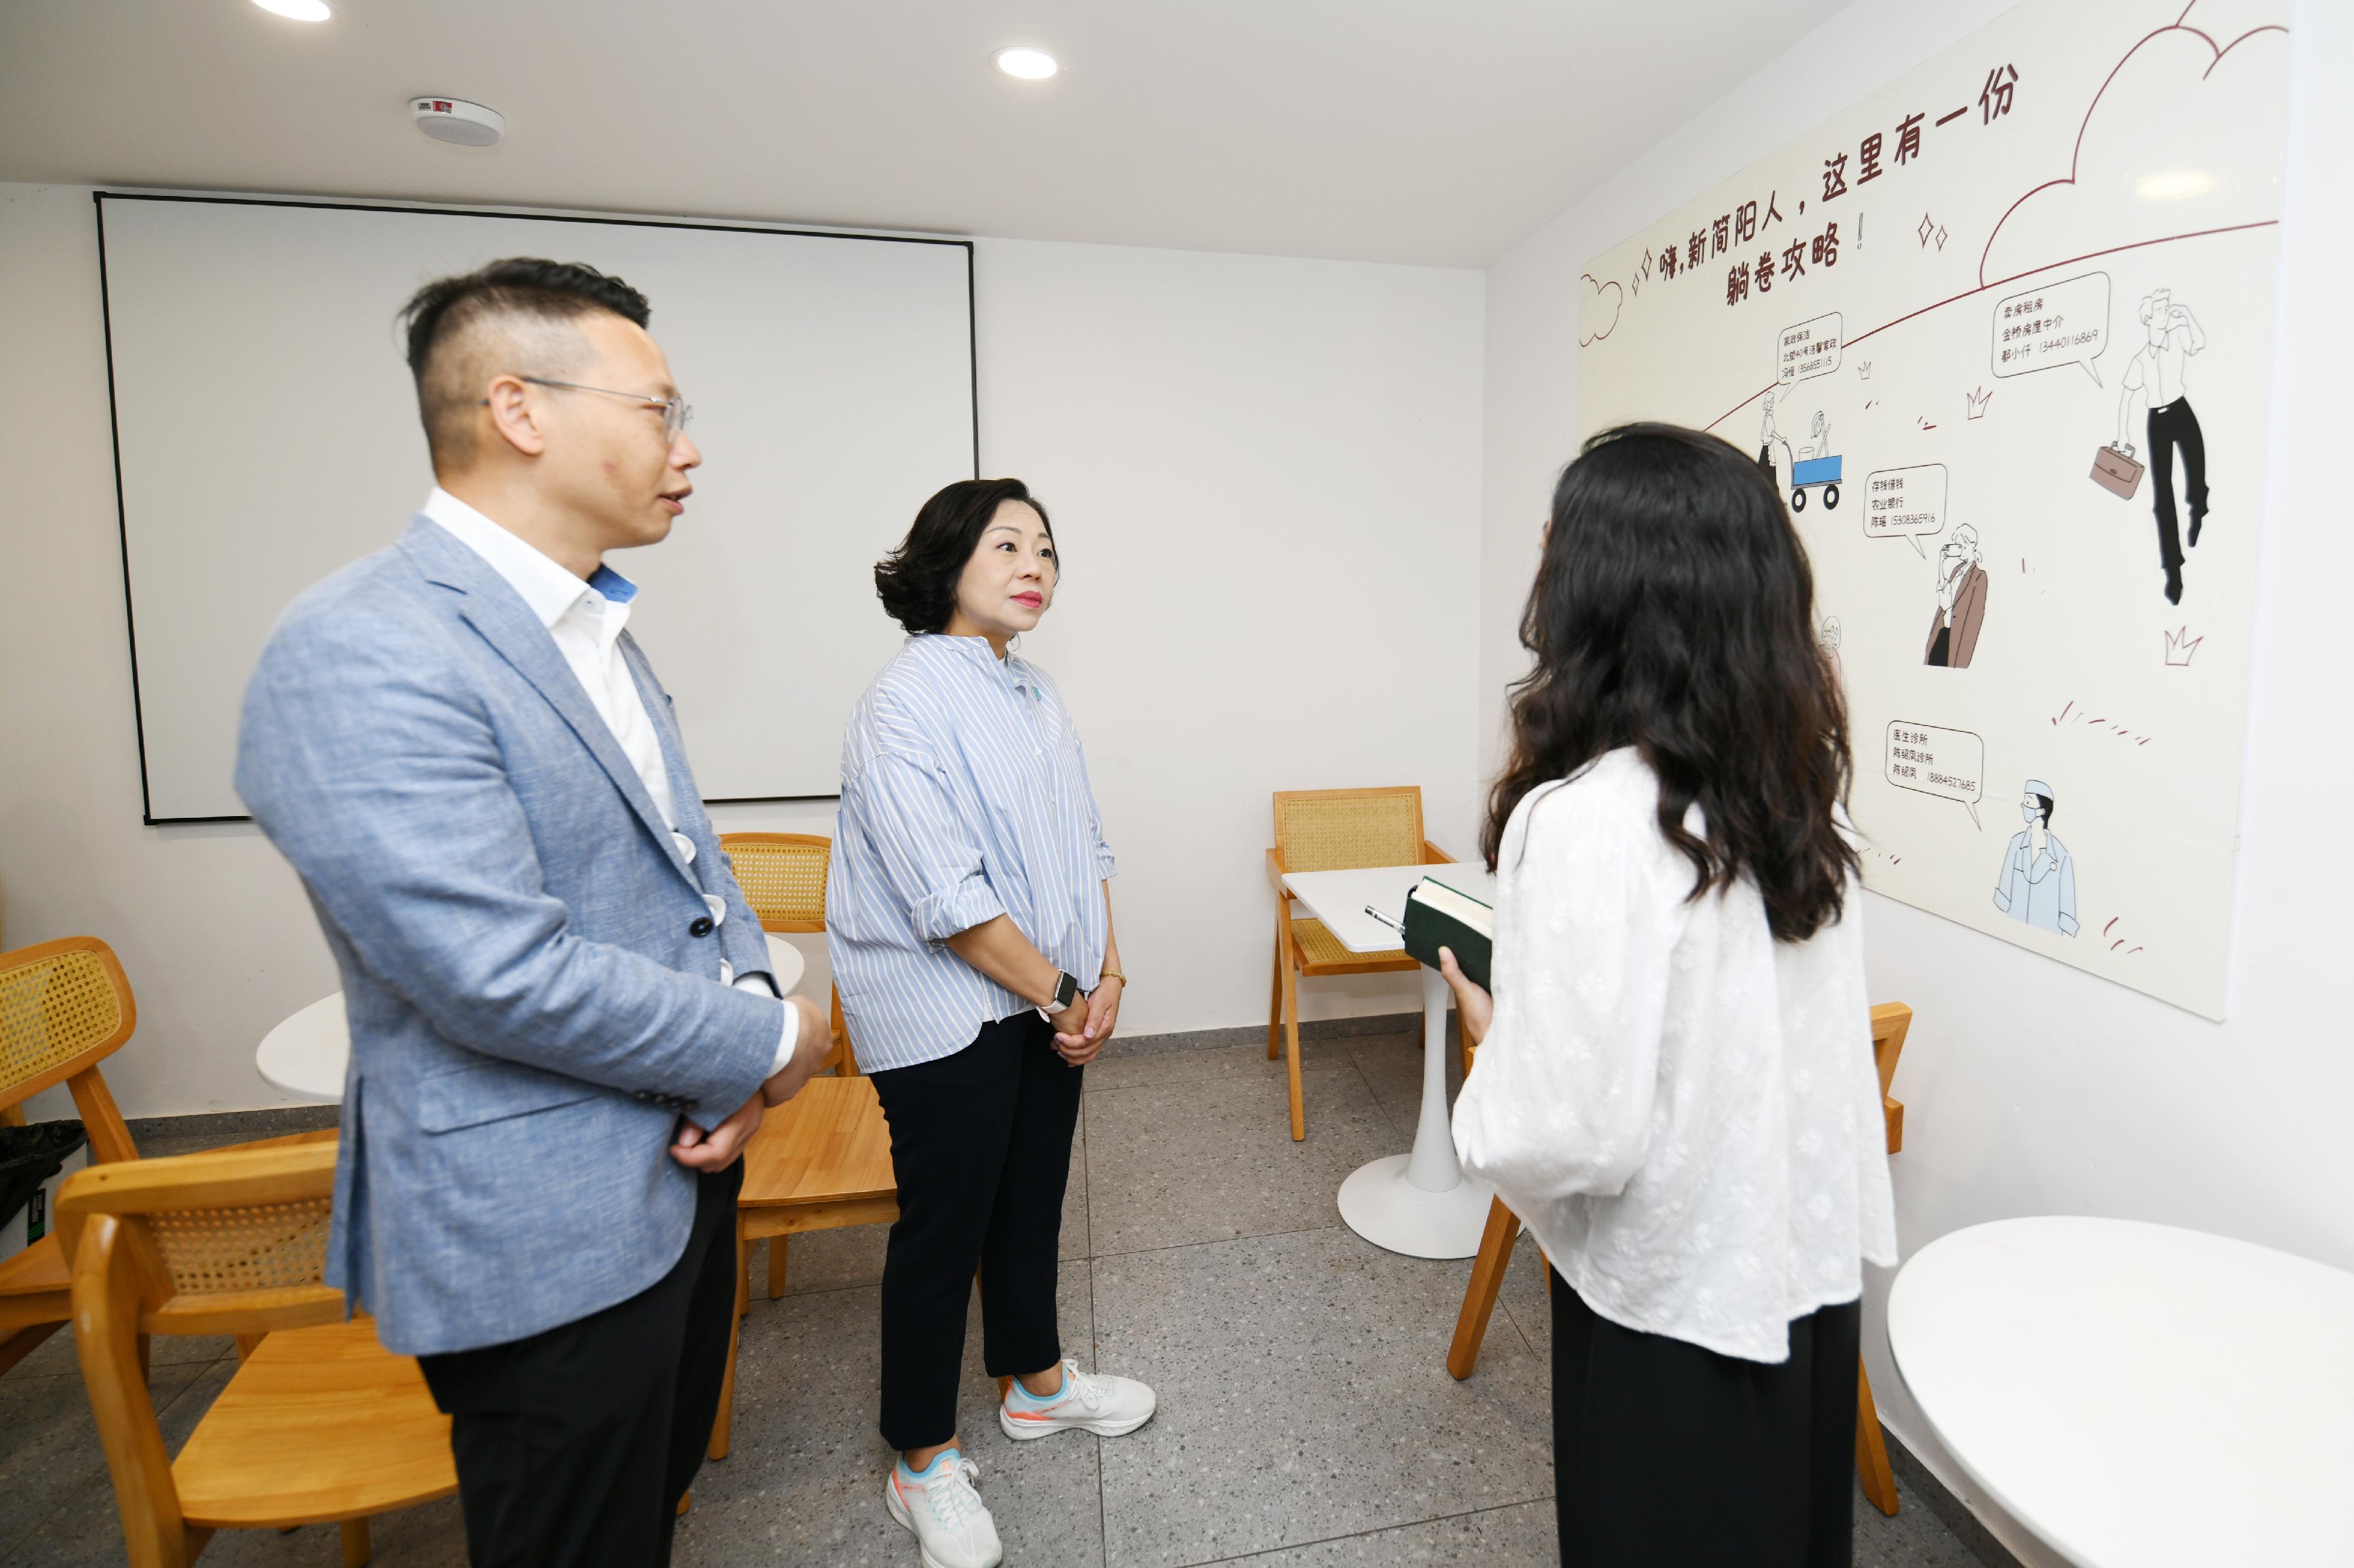 The Secretary for Home and Youth Affairs, Miss Alice Mak, visited Chengdu today (June 6). Photo shows Miss Mak (centre) and the Director of the Hong Kong Economic and Trade Office in Chengdu, Mr Enoch Yuen (left), touring the facilities of the Yijiang Jinshui Community Living Space.